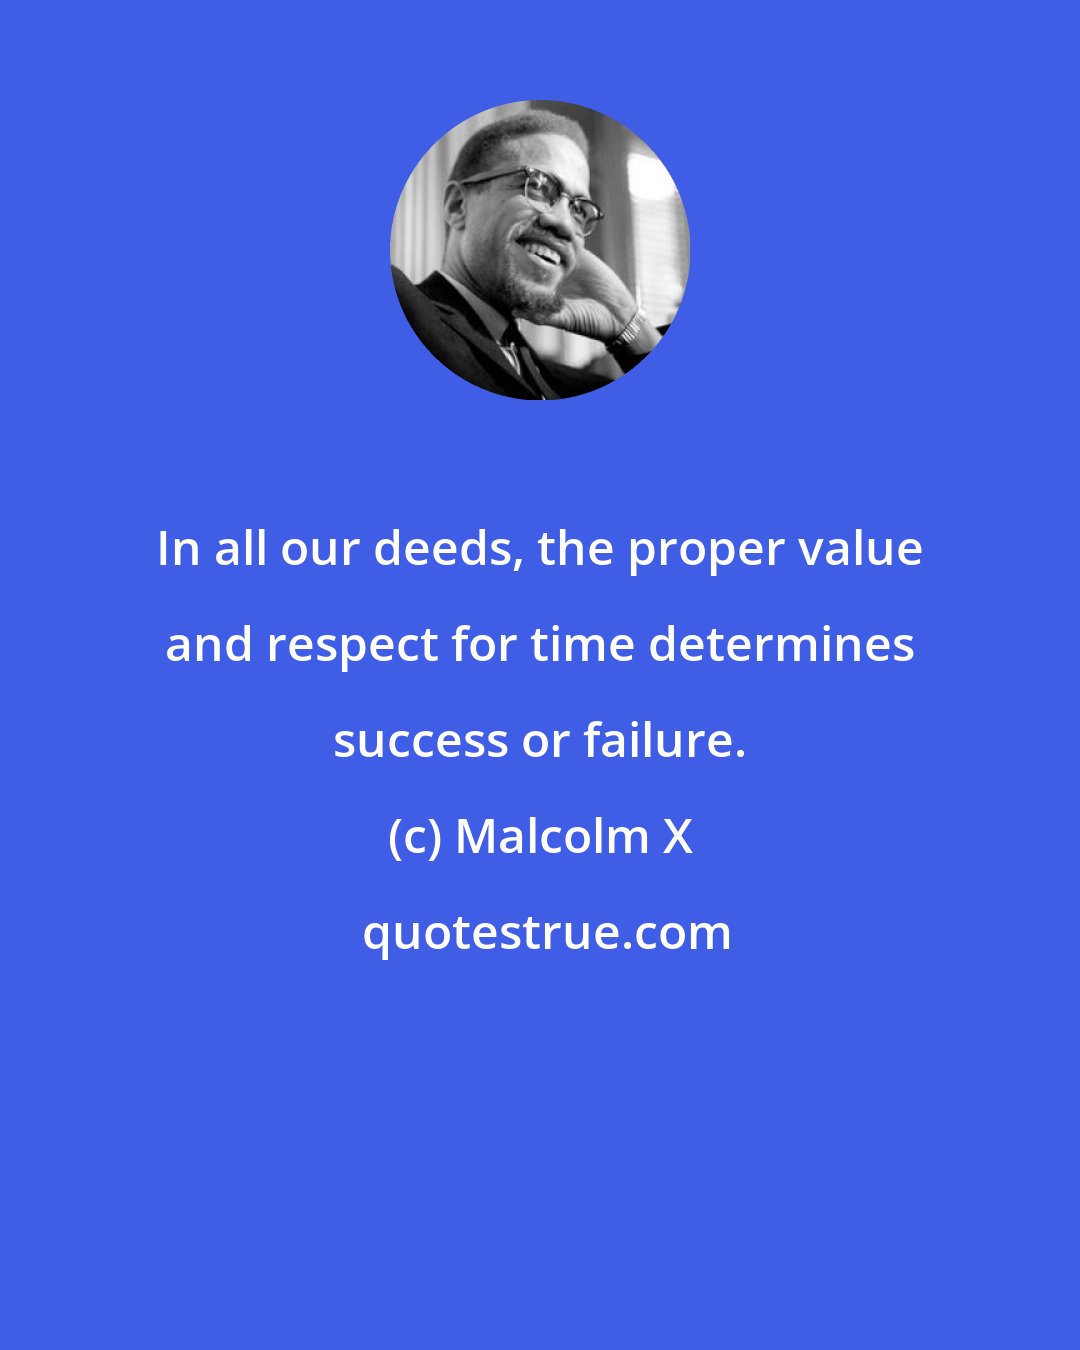 Malcolm X: In all our deeds, the proper value and respect for time determines success or failure.